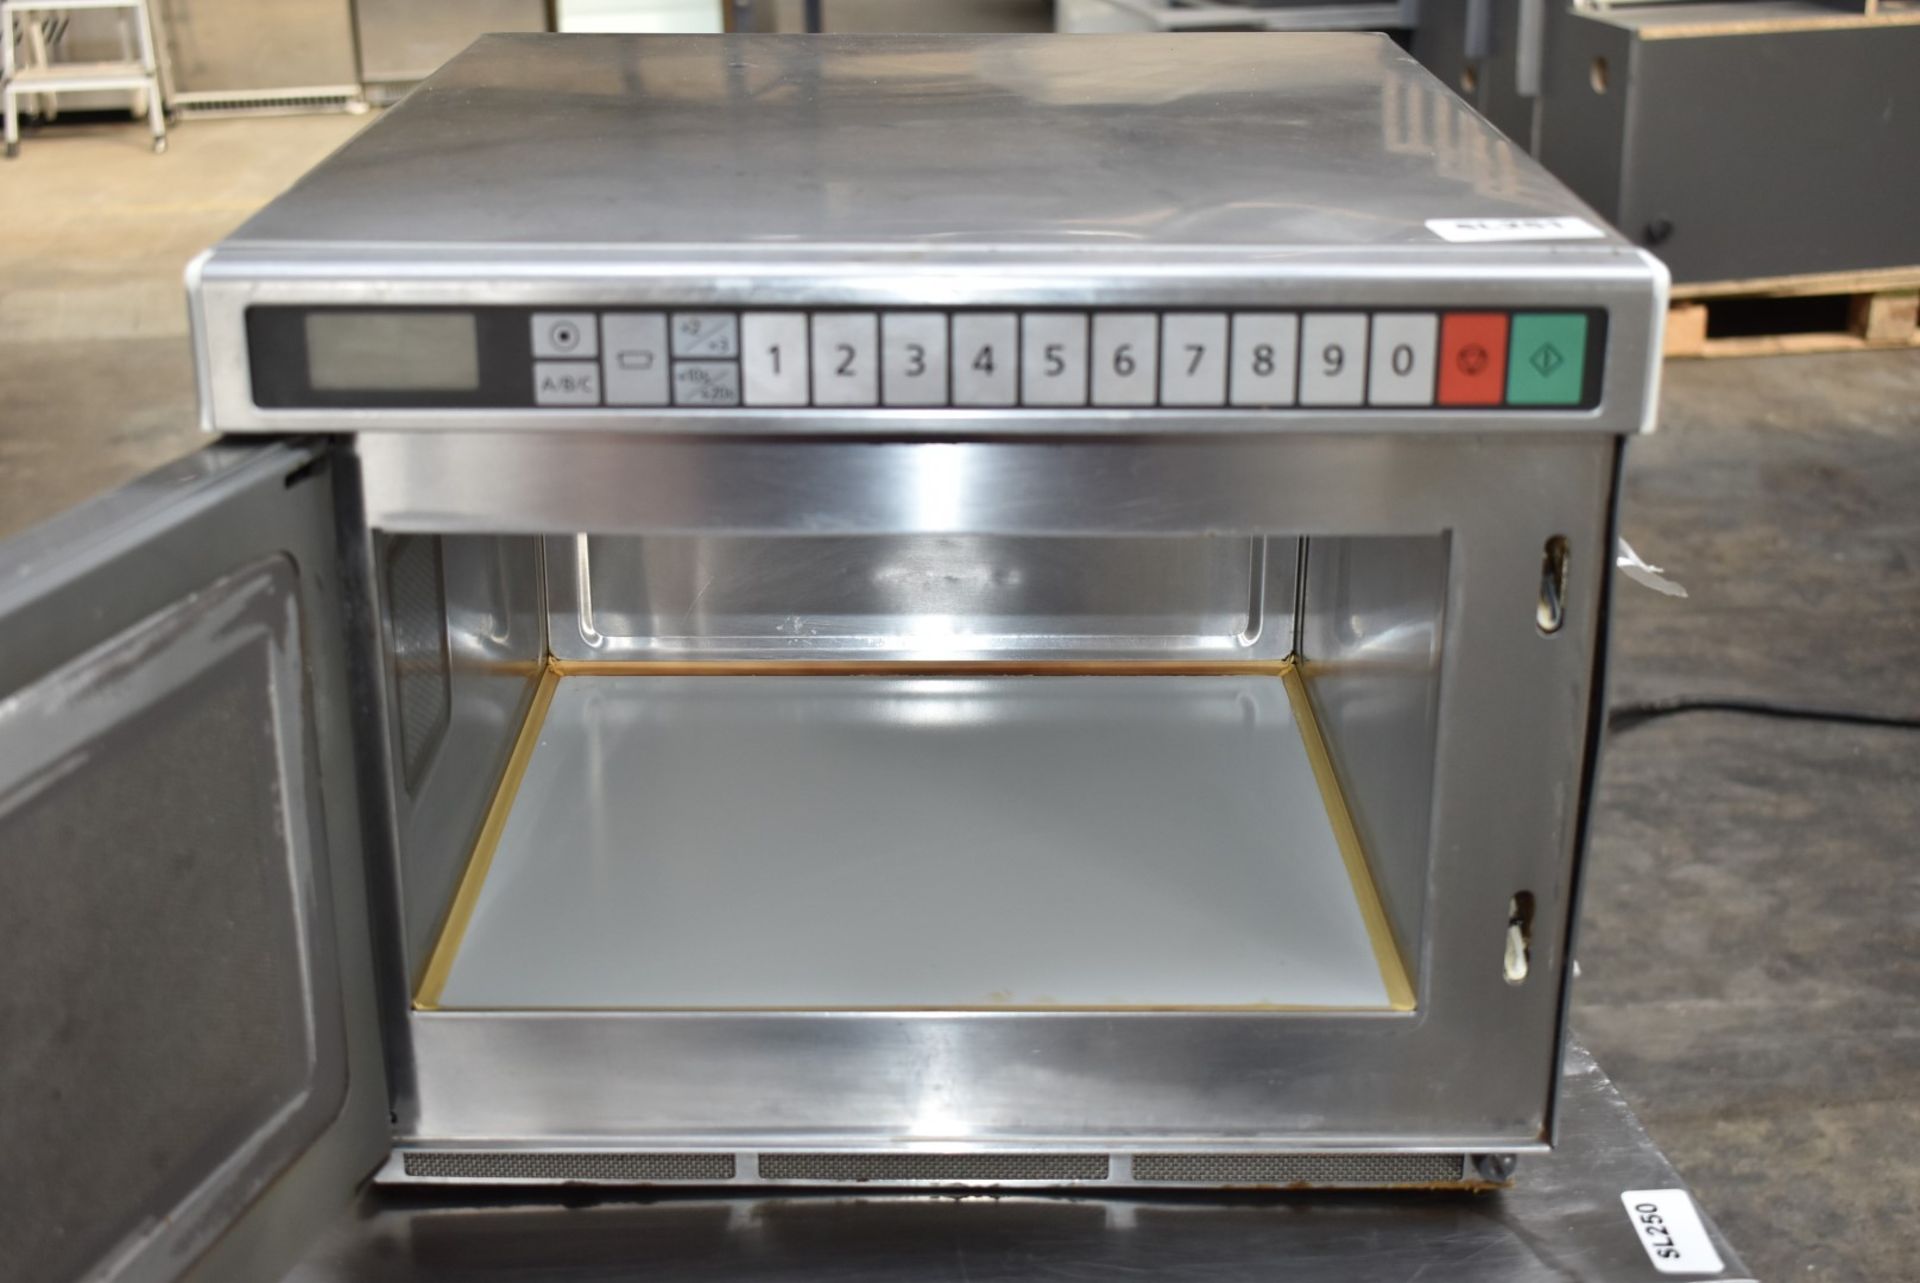 1 x Panasonic Commercial Microwave Oven With Stainless Steel Exterior - Recently Removed From - Image 3 of 6